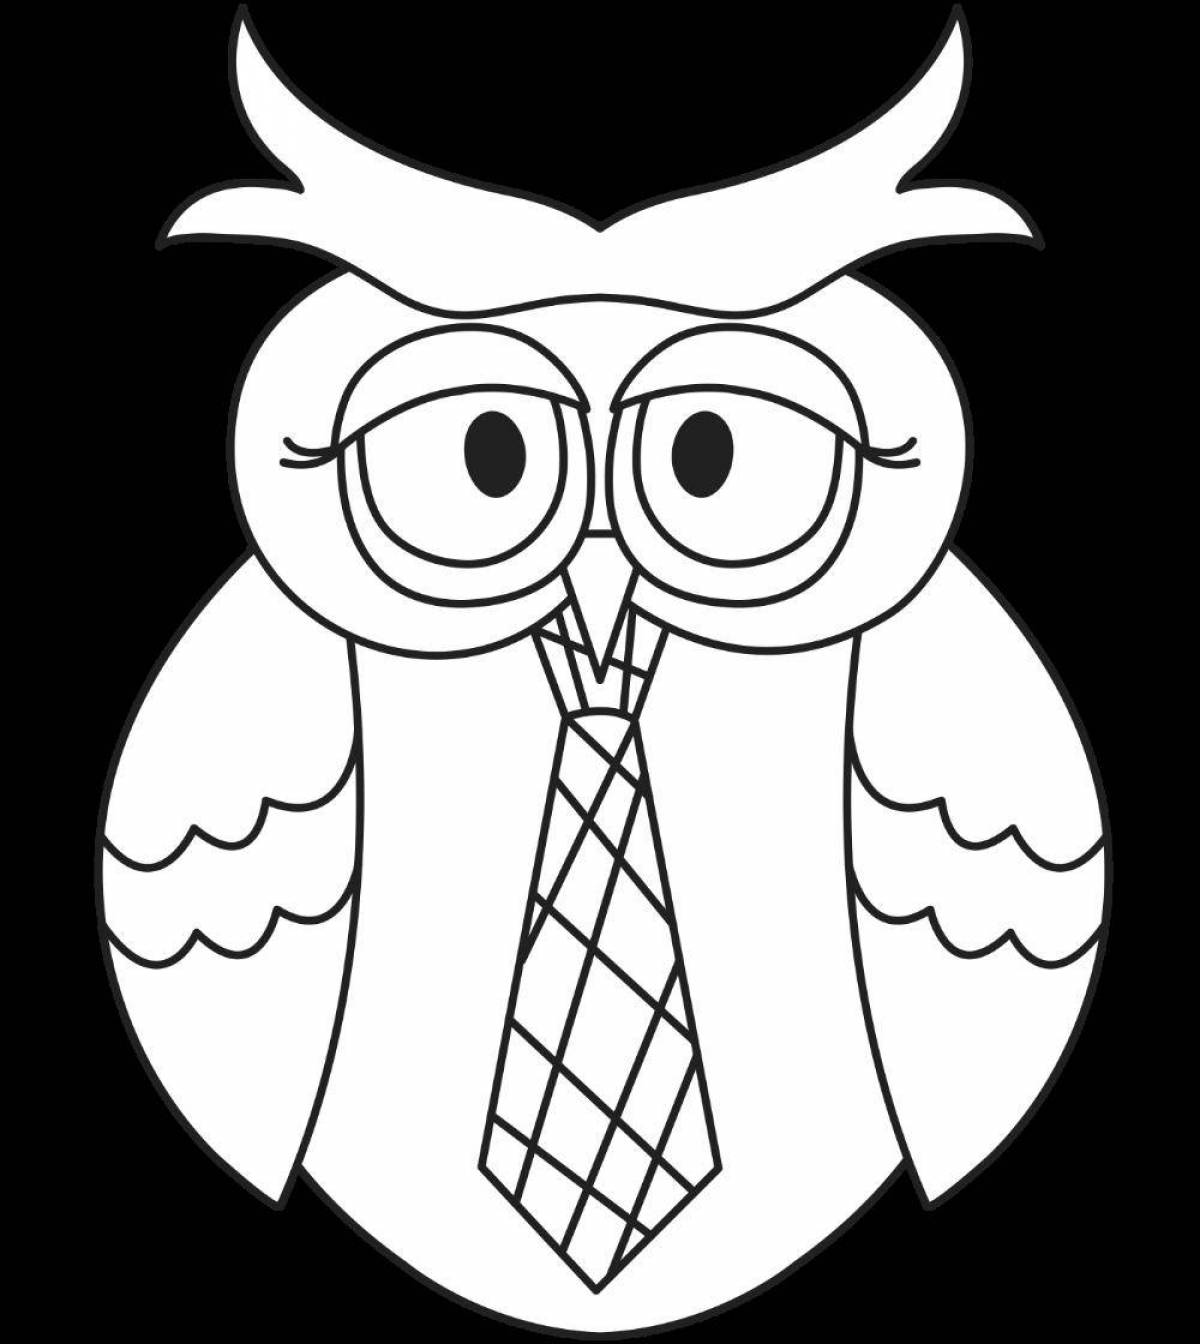 Amazing smart owl coloring page for kids